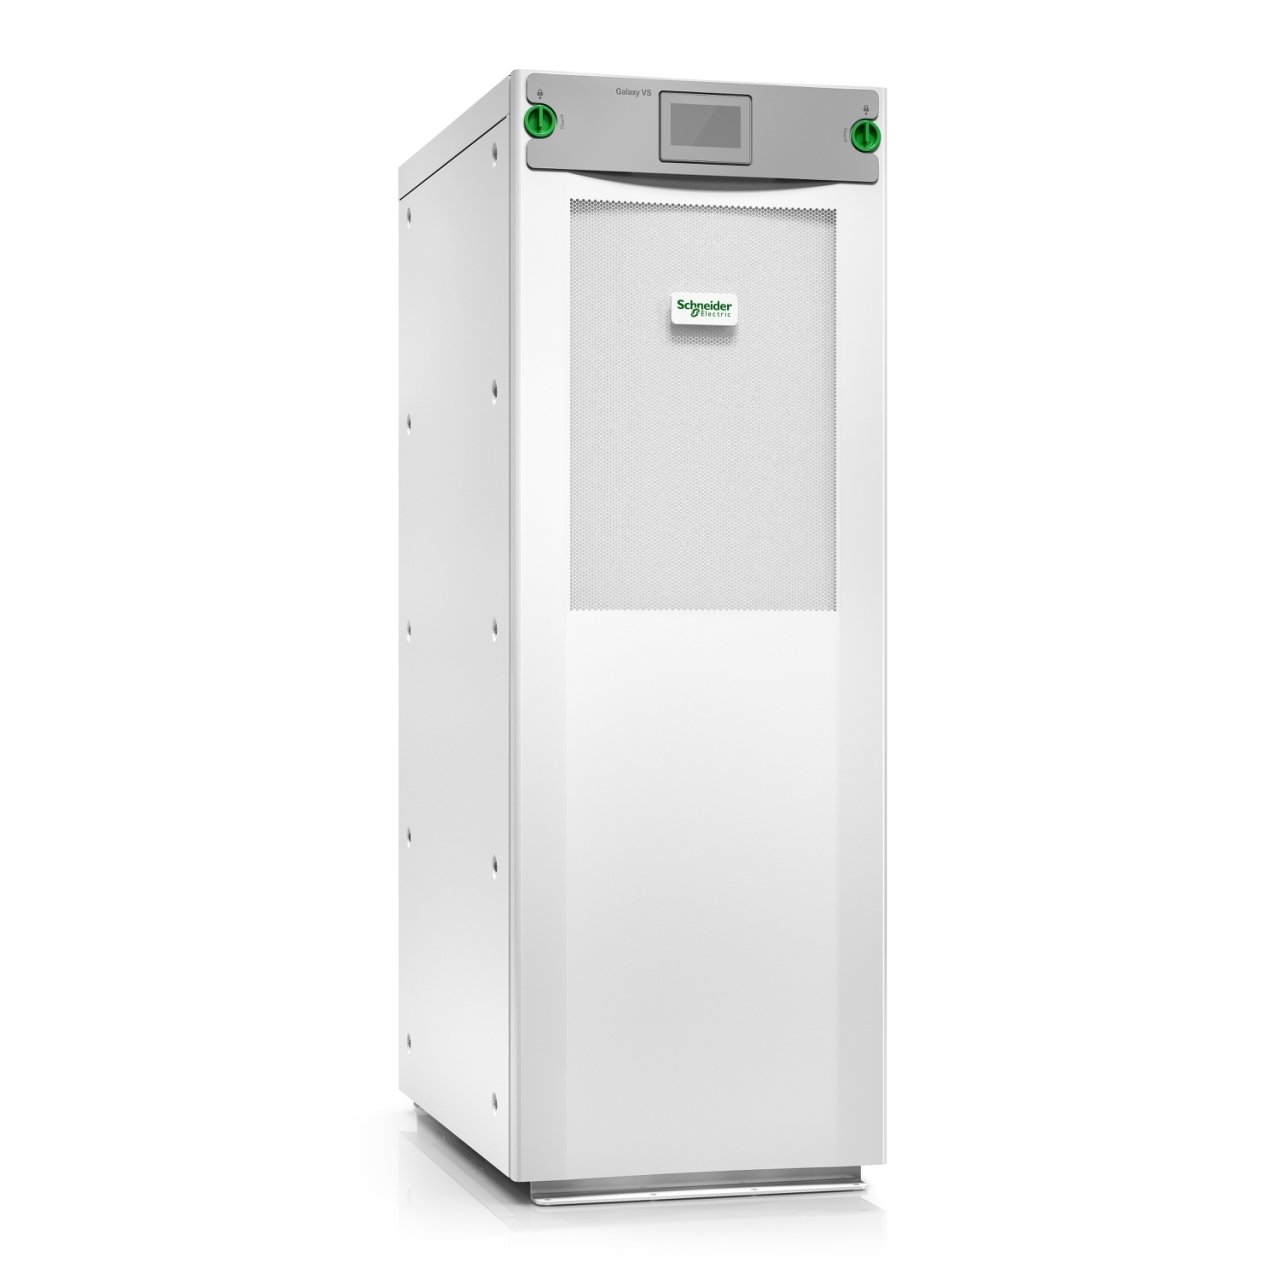 Galaxy VS UPS 50kW 400V with N+1 power module, for 5 smart modular 9Ah battery strings, Start-up 5x8